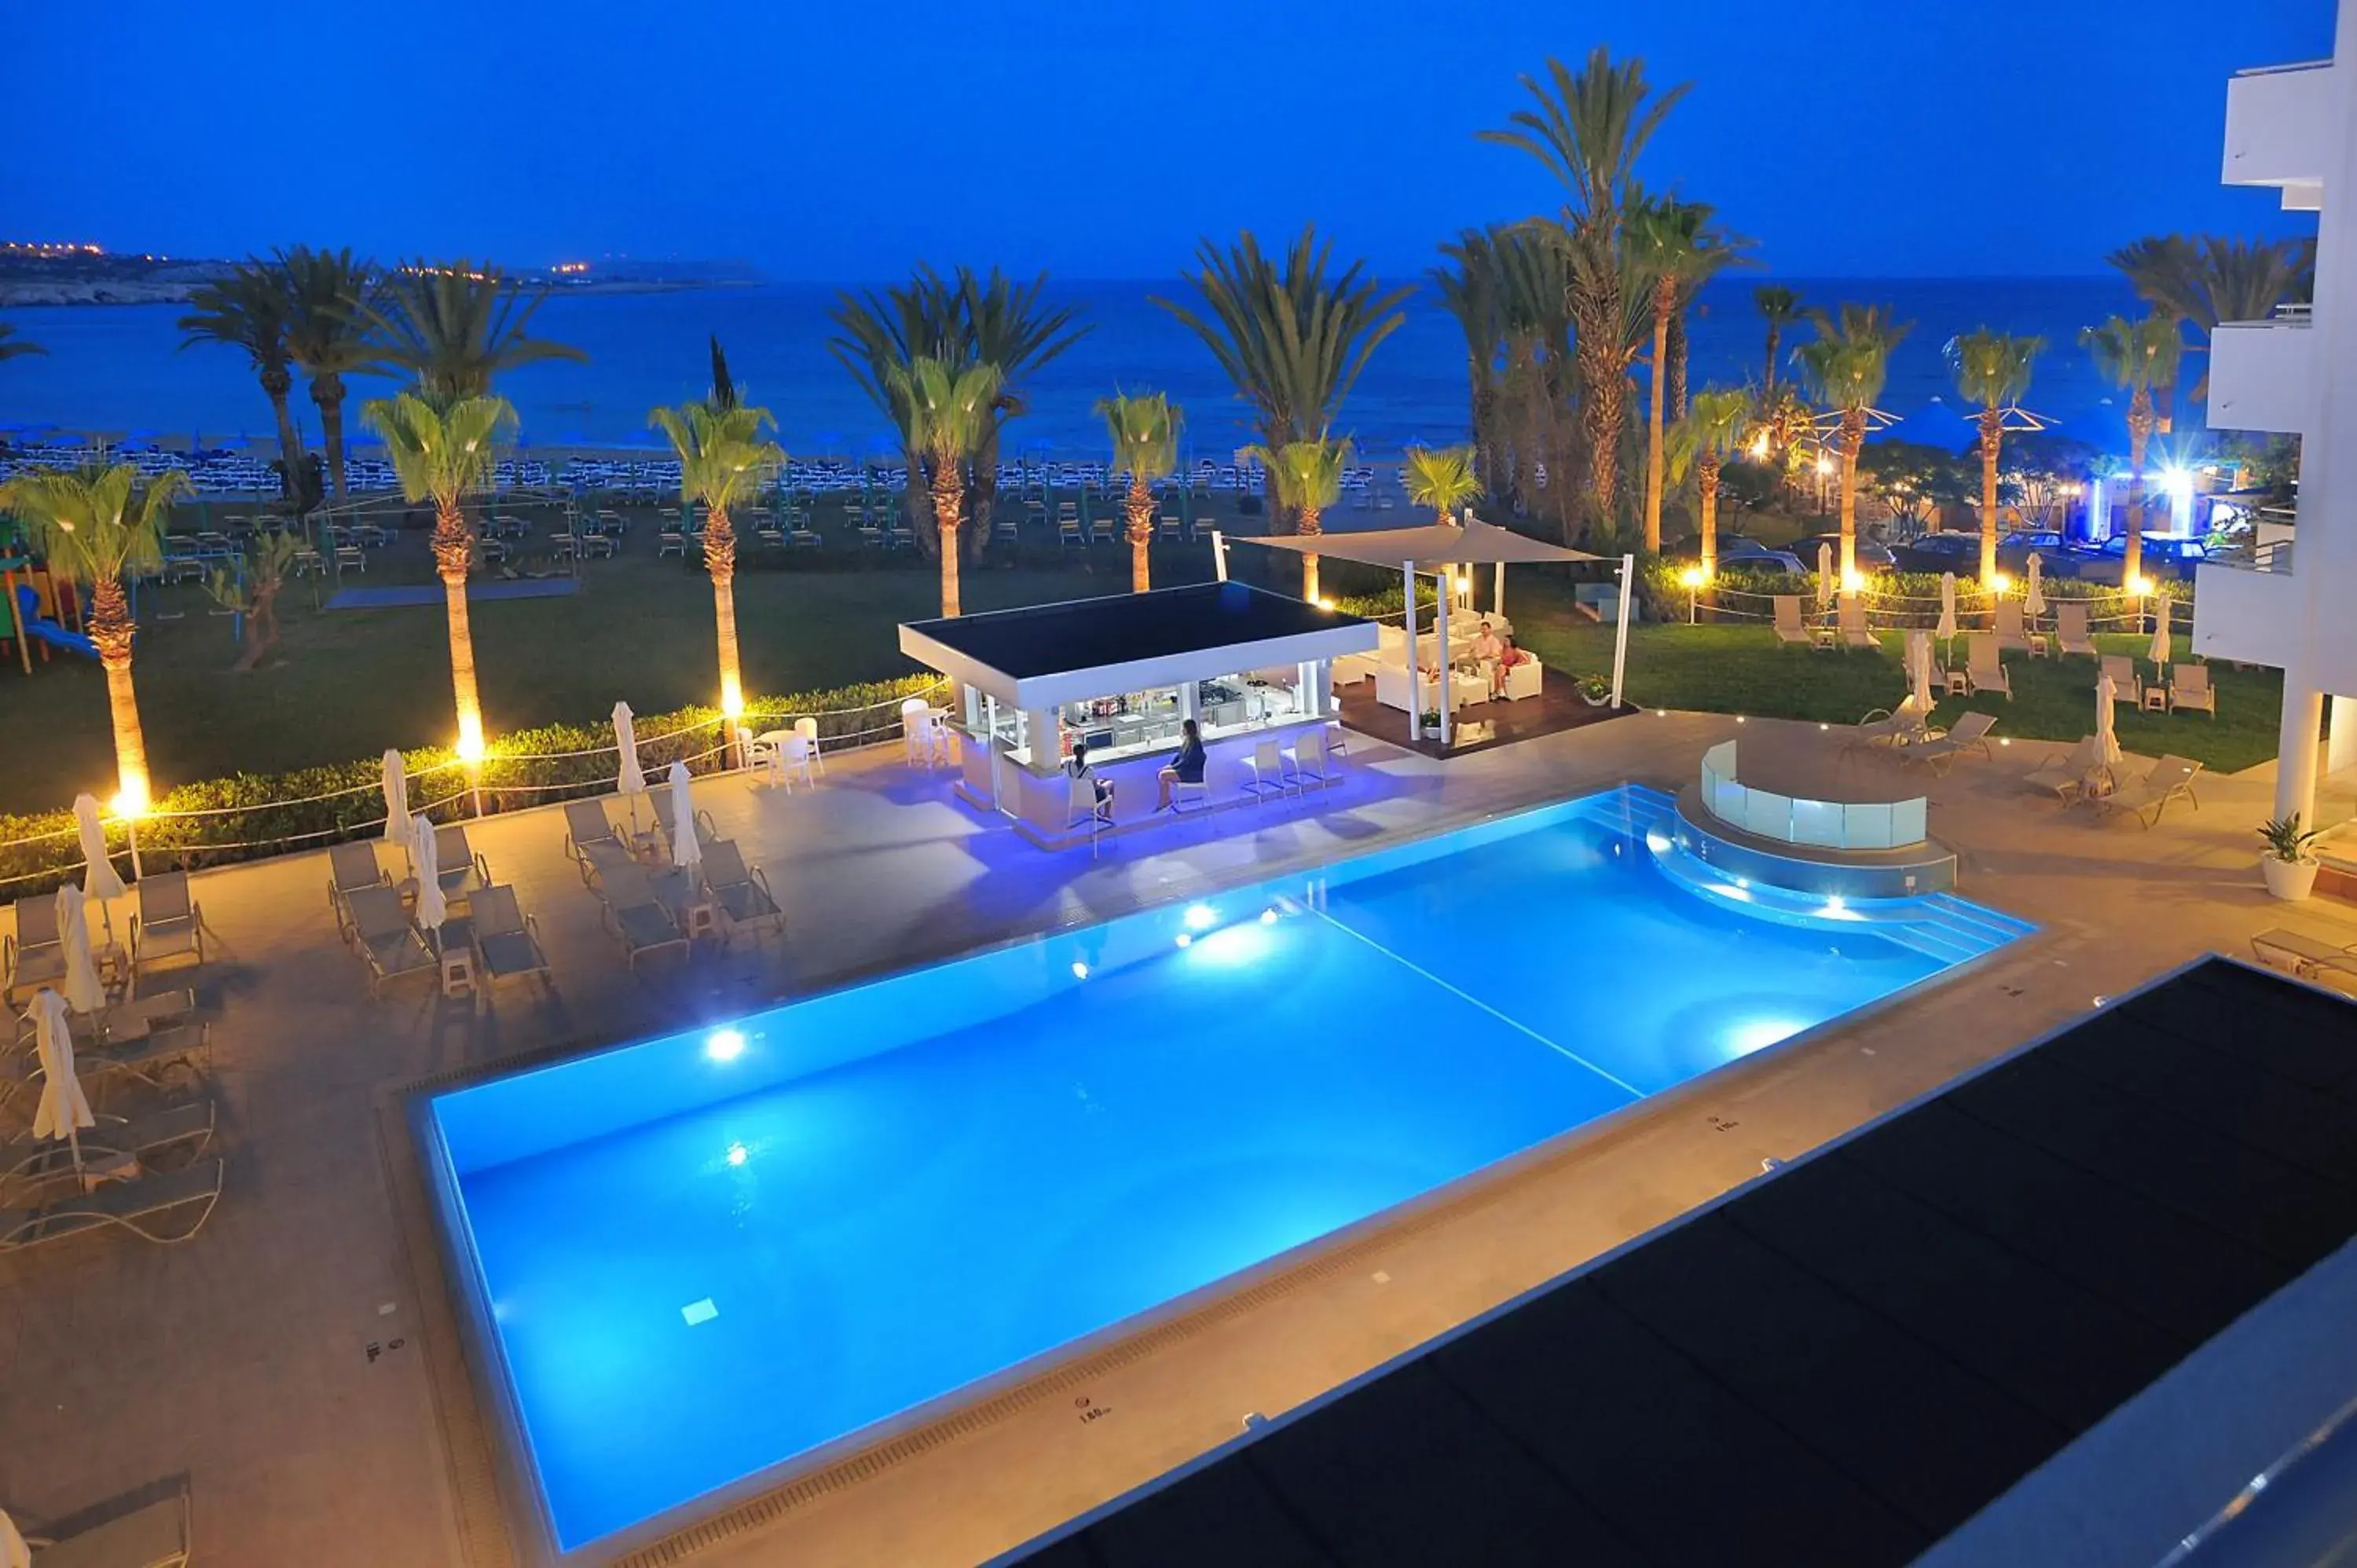 Night, Pool View in Okeanos Beach Boutique Hotel